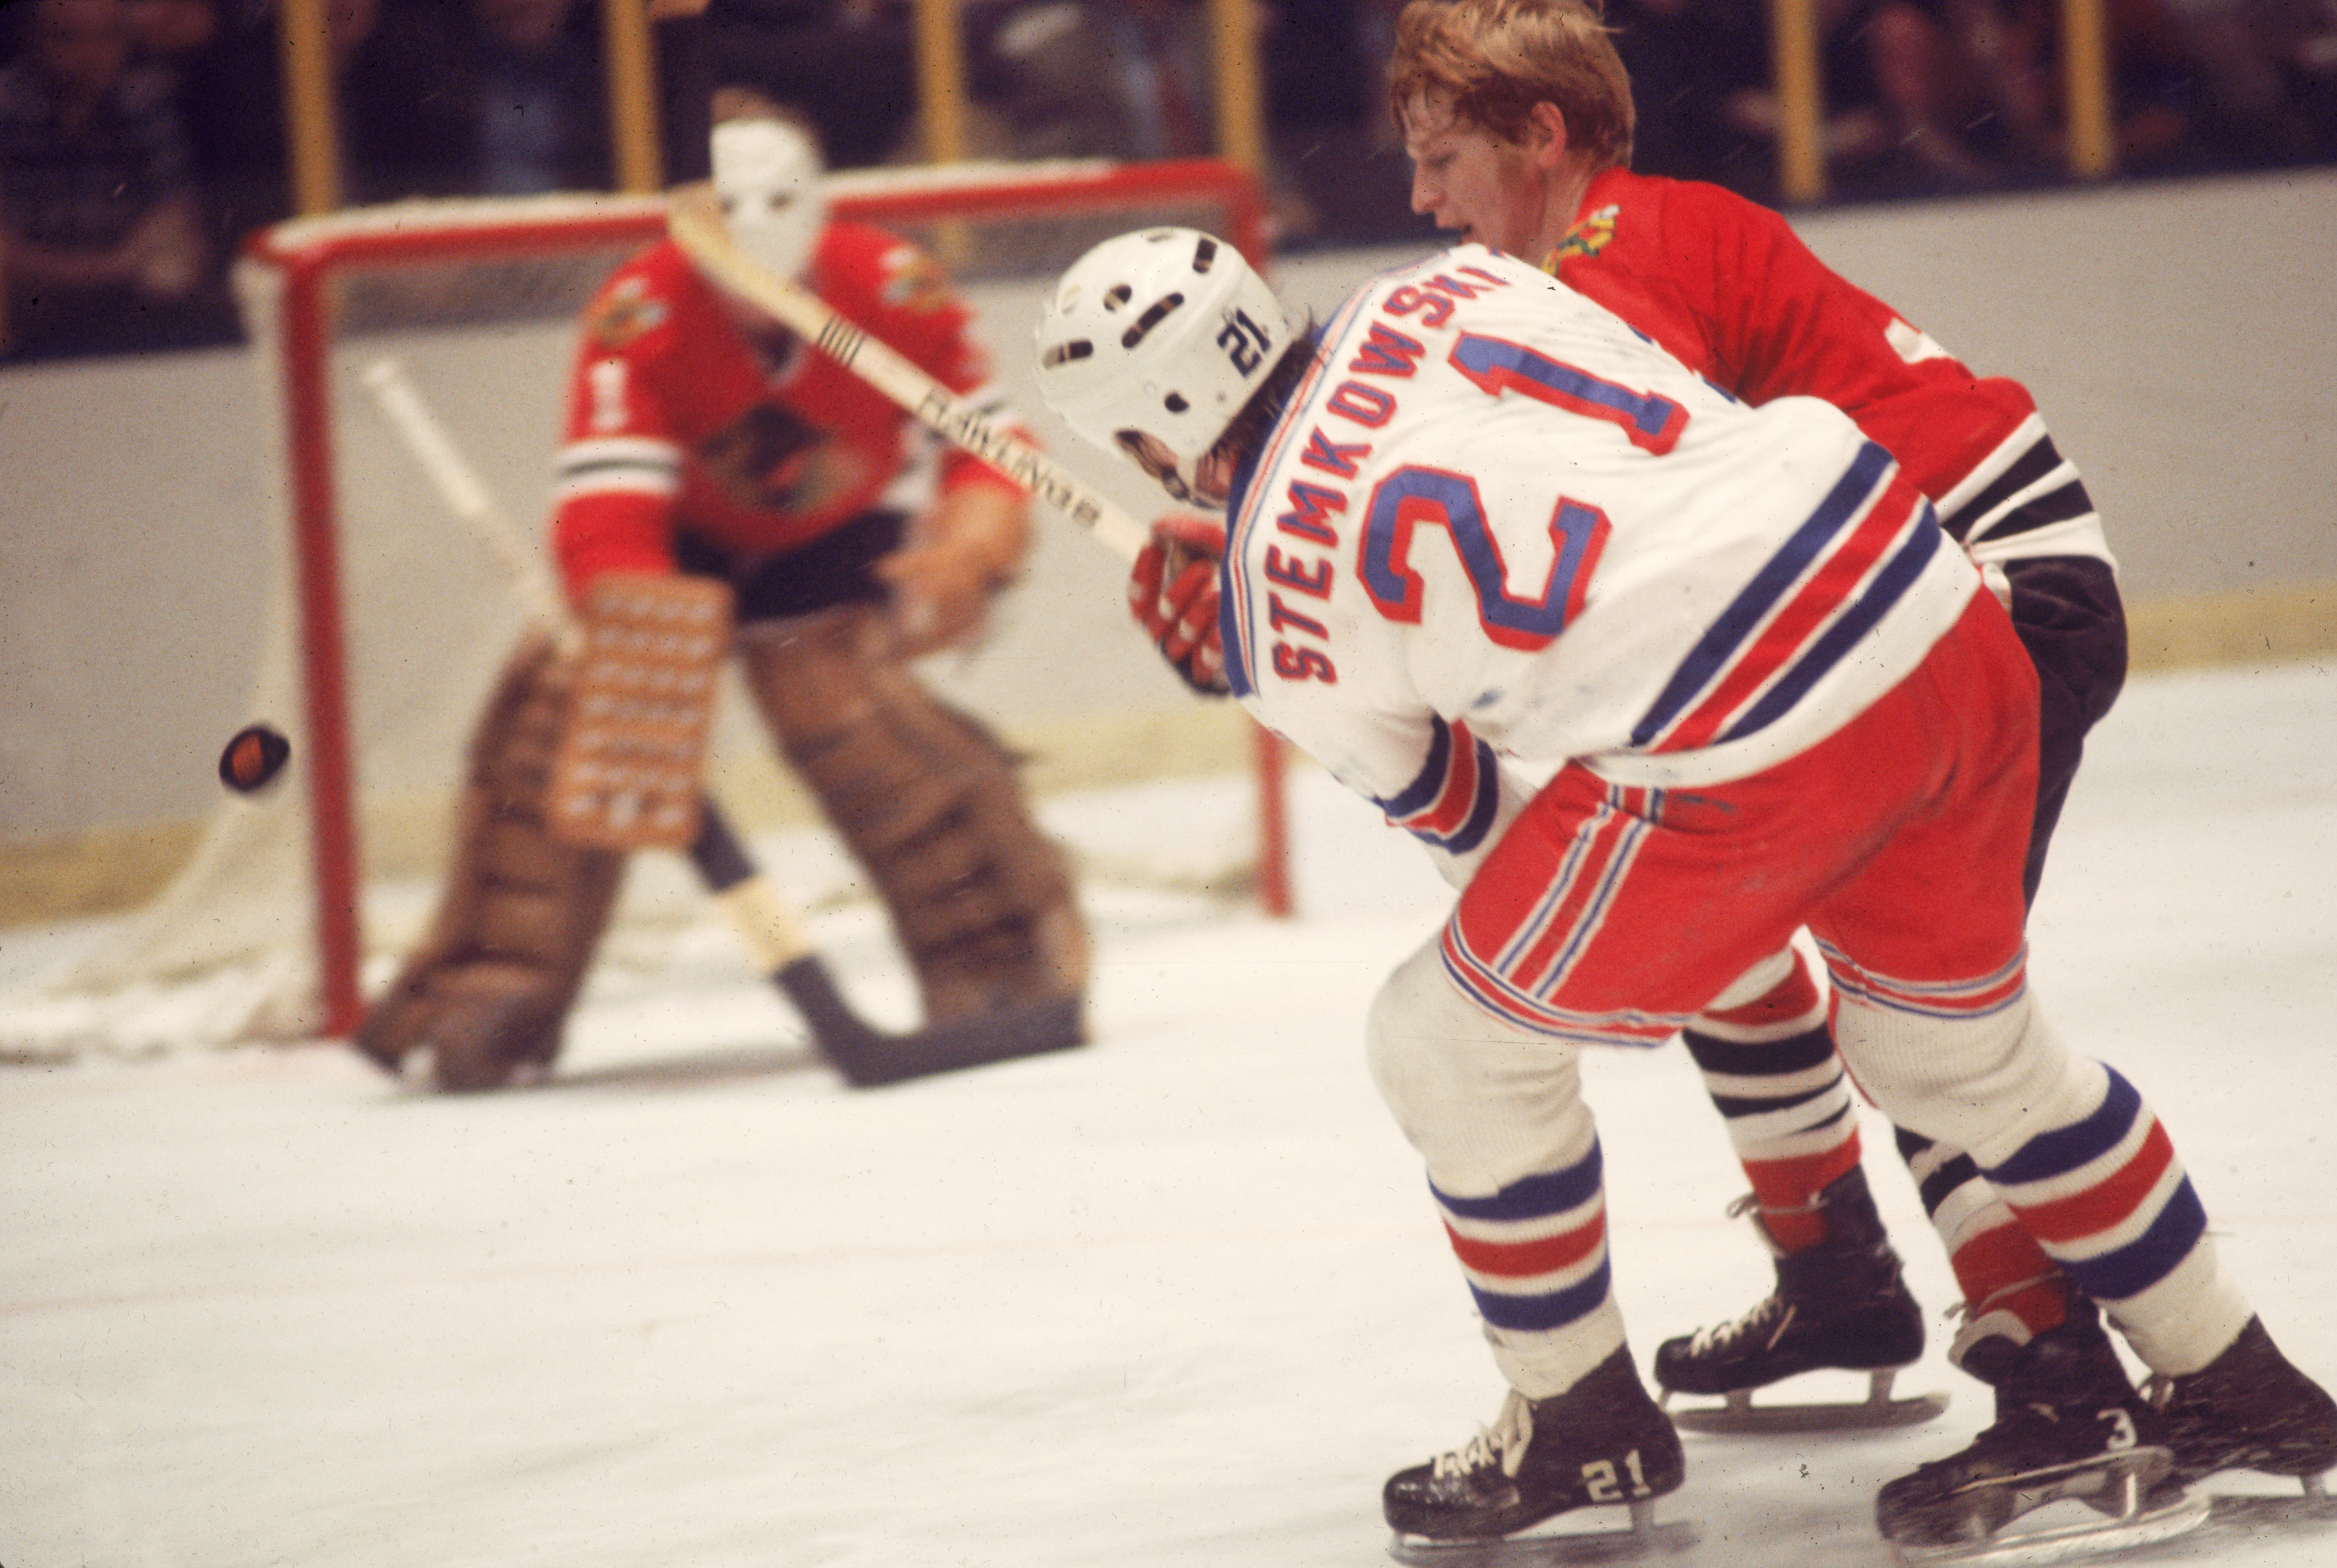 Canadian professional ice hockey player Keith Magnuson (left) of the Chicago Blackhawks checks Pete Stemkowski #21 (center) of the New York Rangers as Chicago's goalie looks on during a game at Madison Square Garden, New York, 1970s. Stemkowski played for the Rangers from 1971 to 1977. (Photo by Melchior DiGiacomo/Getty Images)